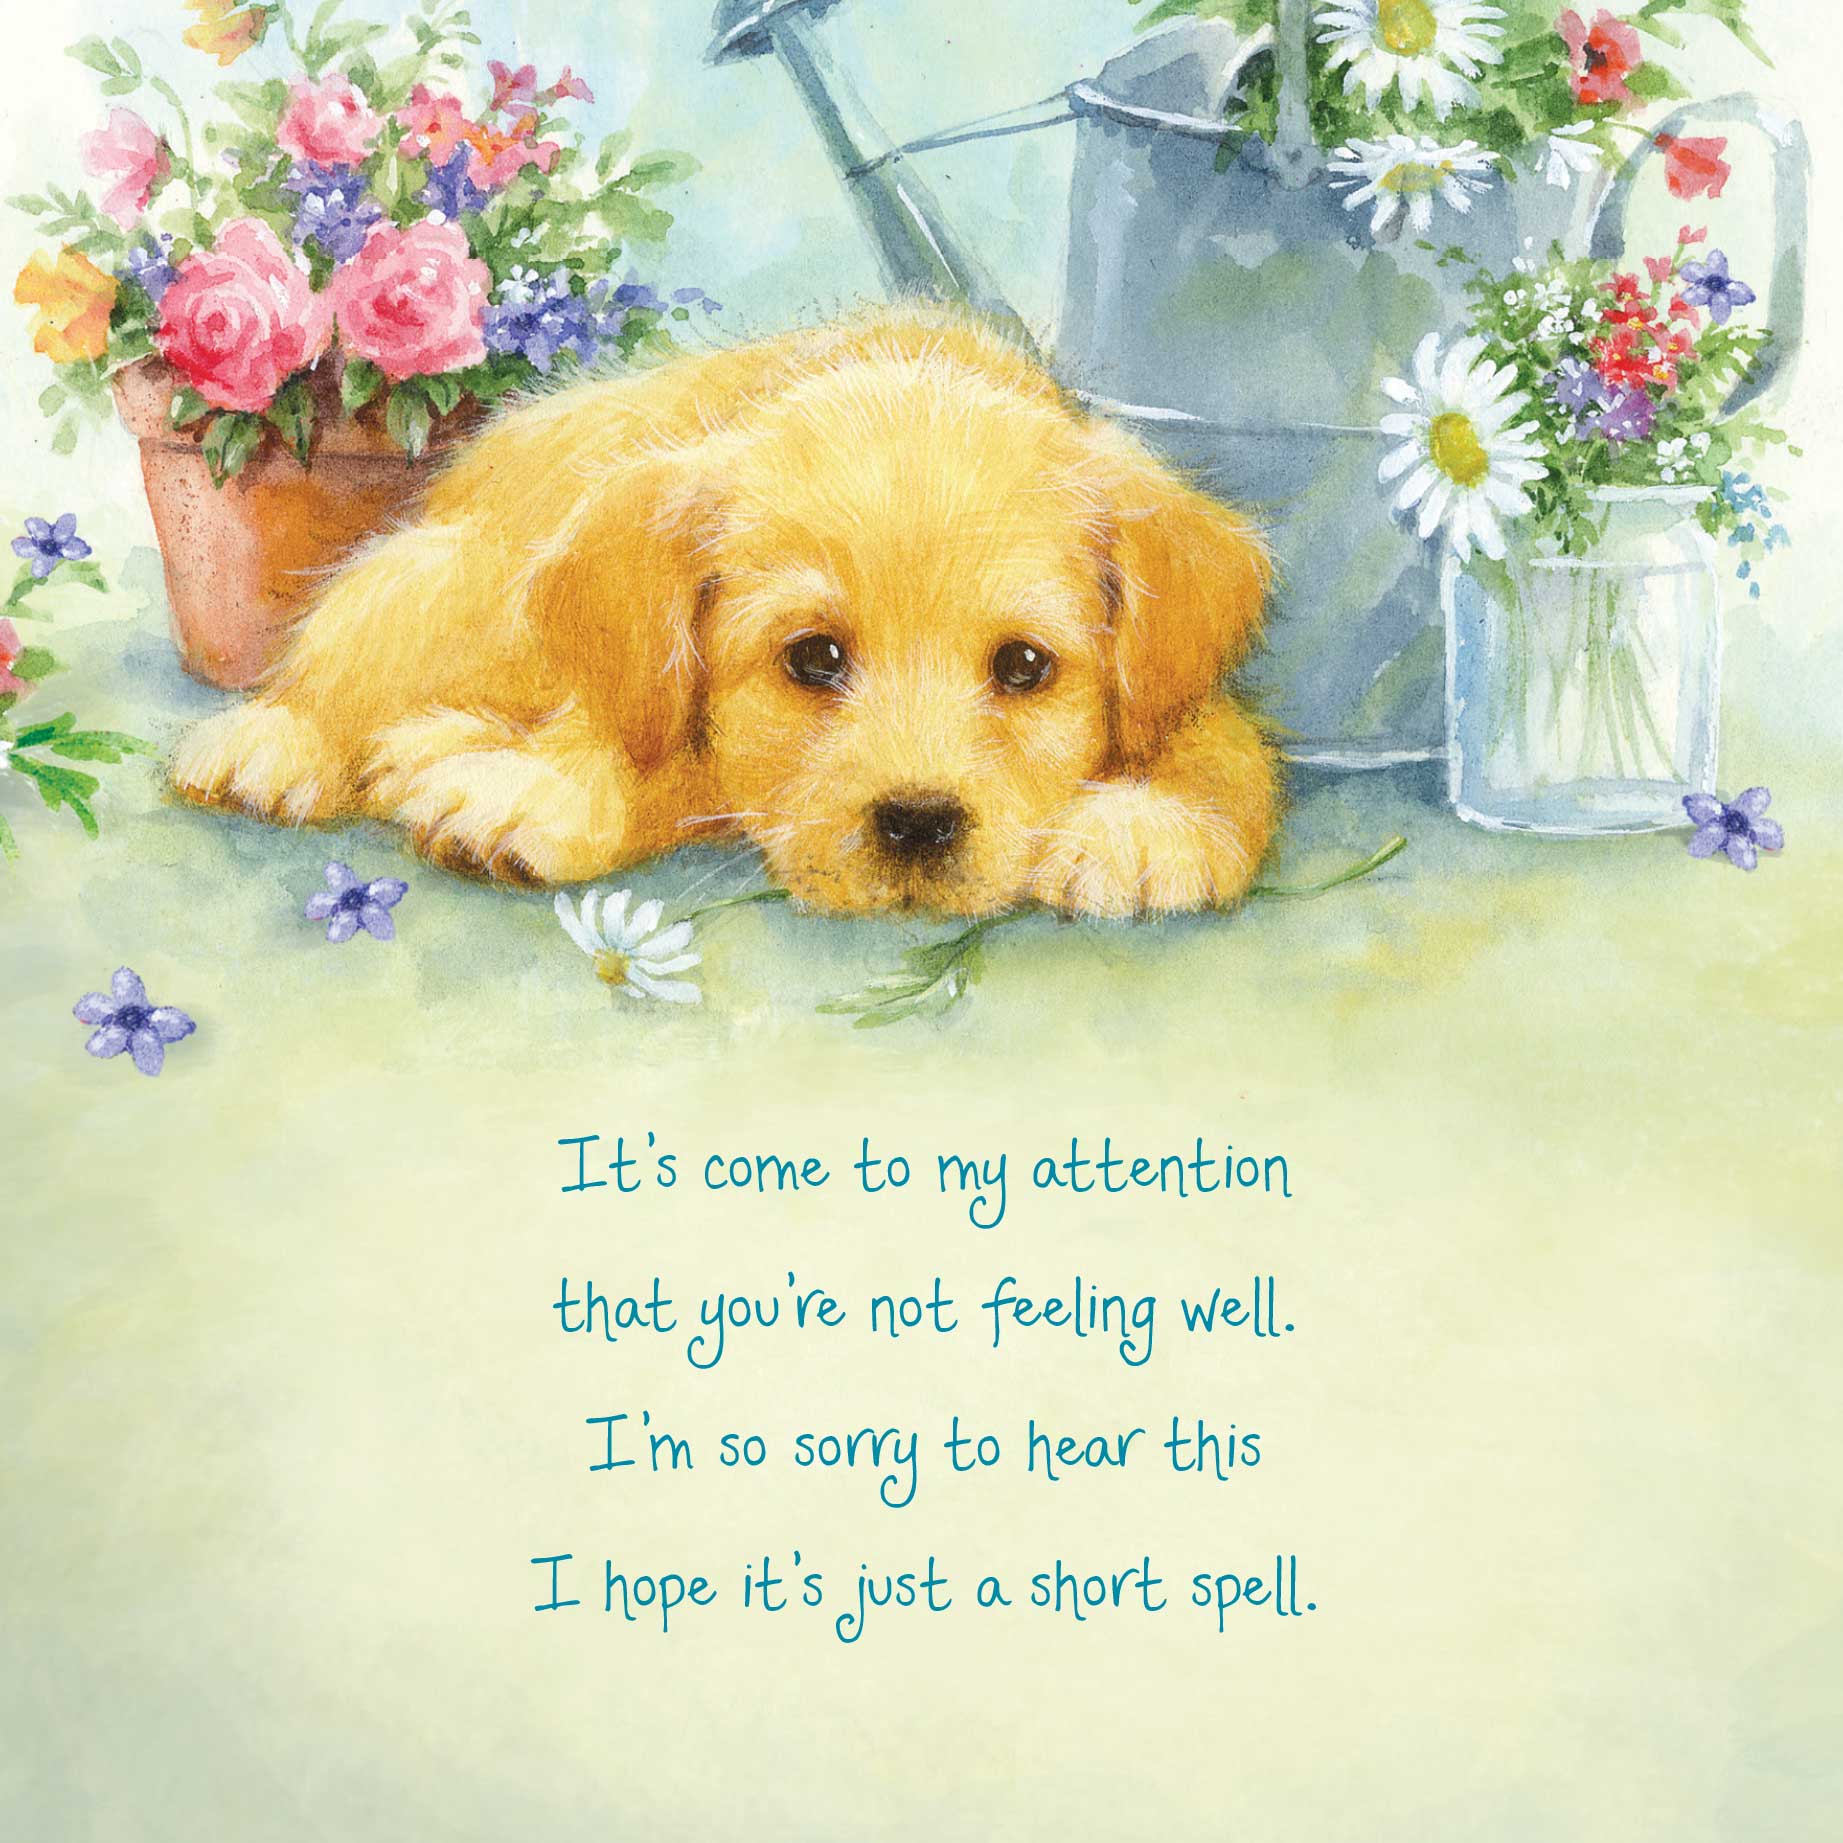 Get better picture. Открытка get well soon. Get well открытка. Открытка get-well Card. Greeting Cards get well soon.